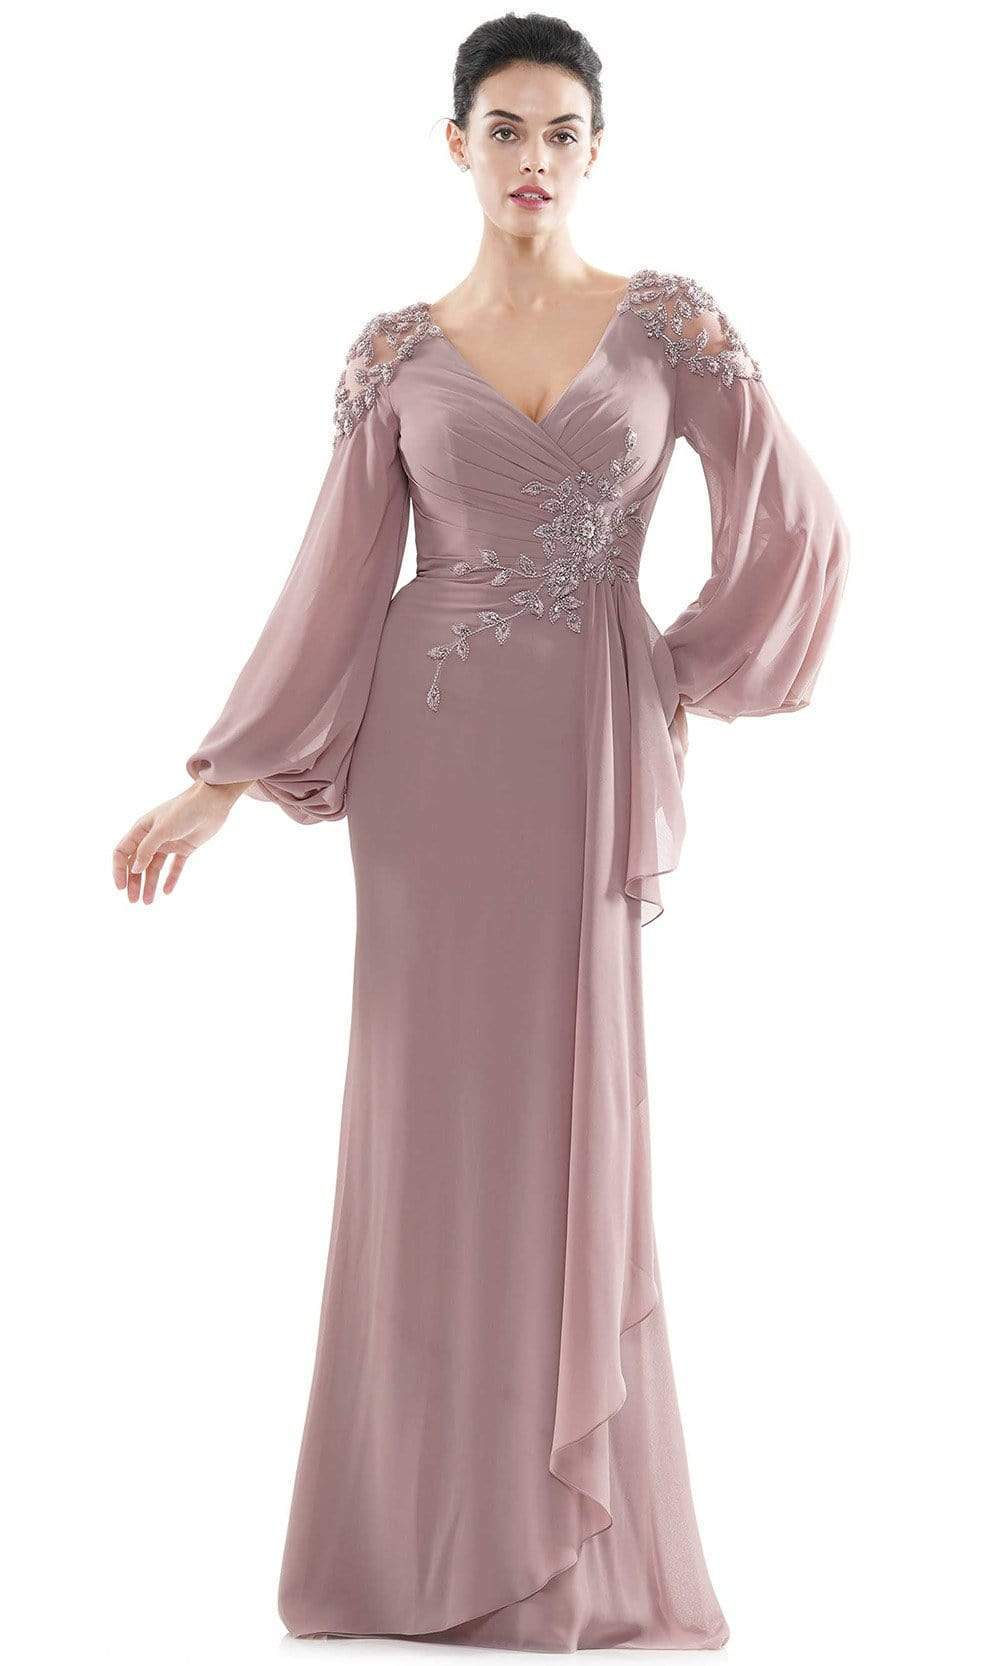 Marsoni by Colors - MV1074 Beaded Appliques Bishop Sleeve Chiffon Gown Mother of the Bride Dresses 4 / Mauve